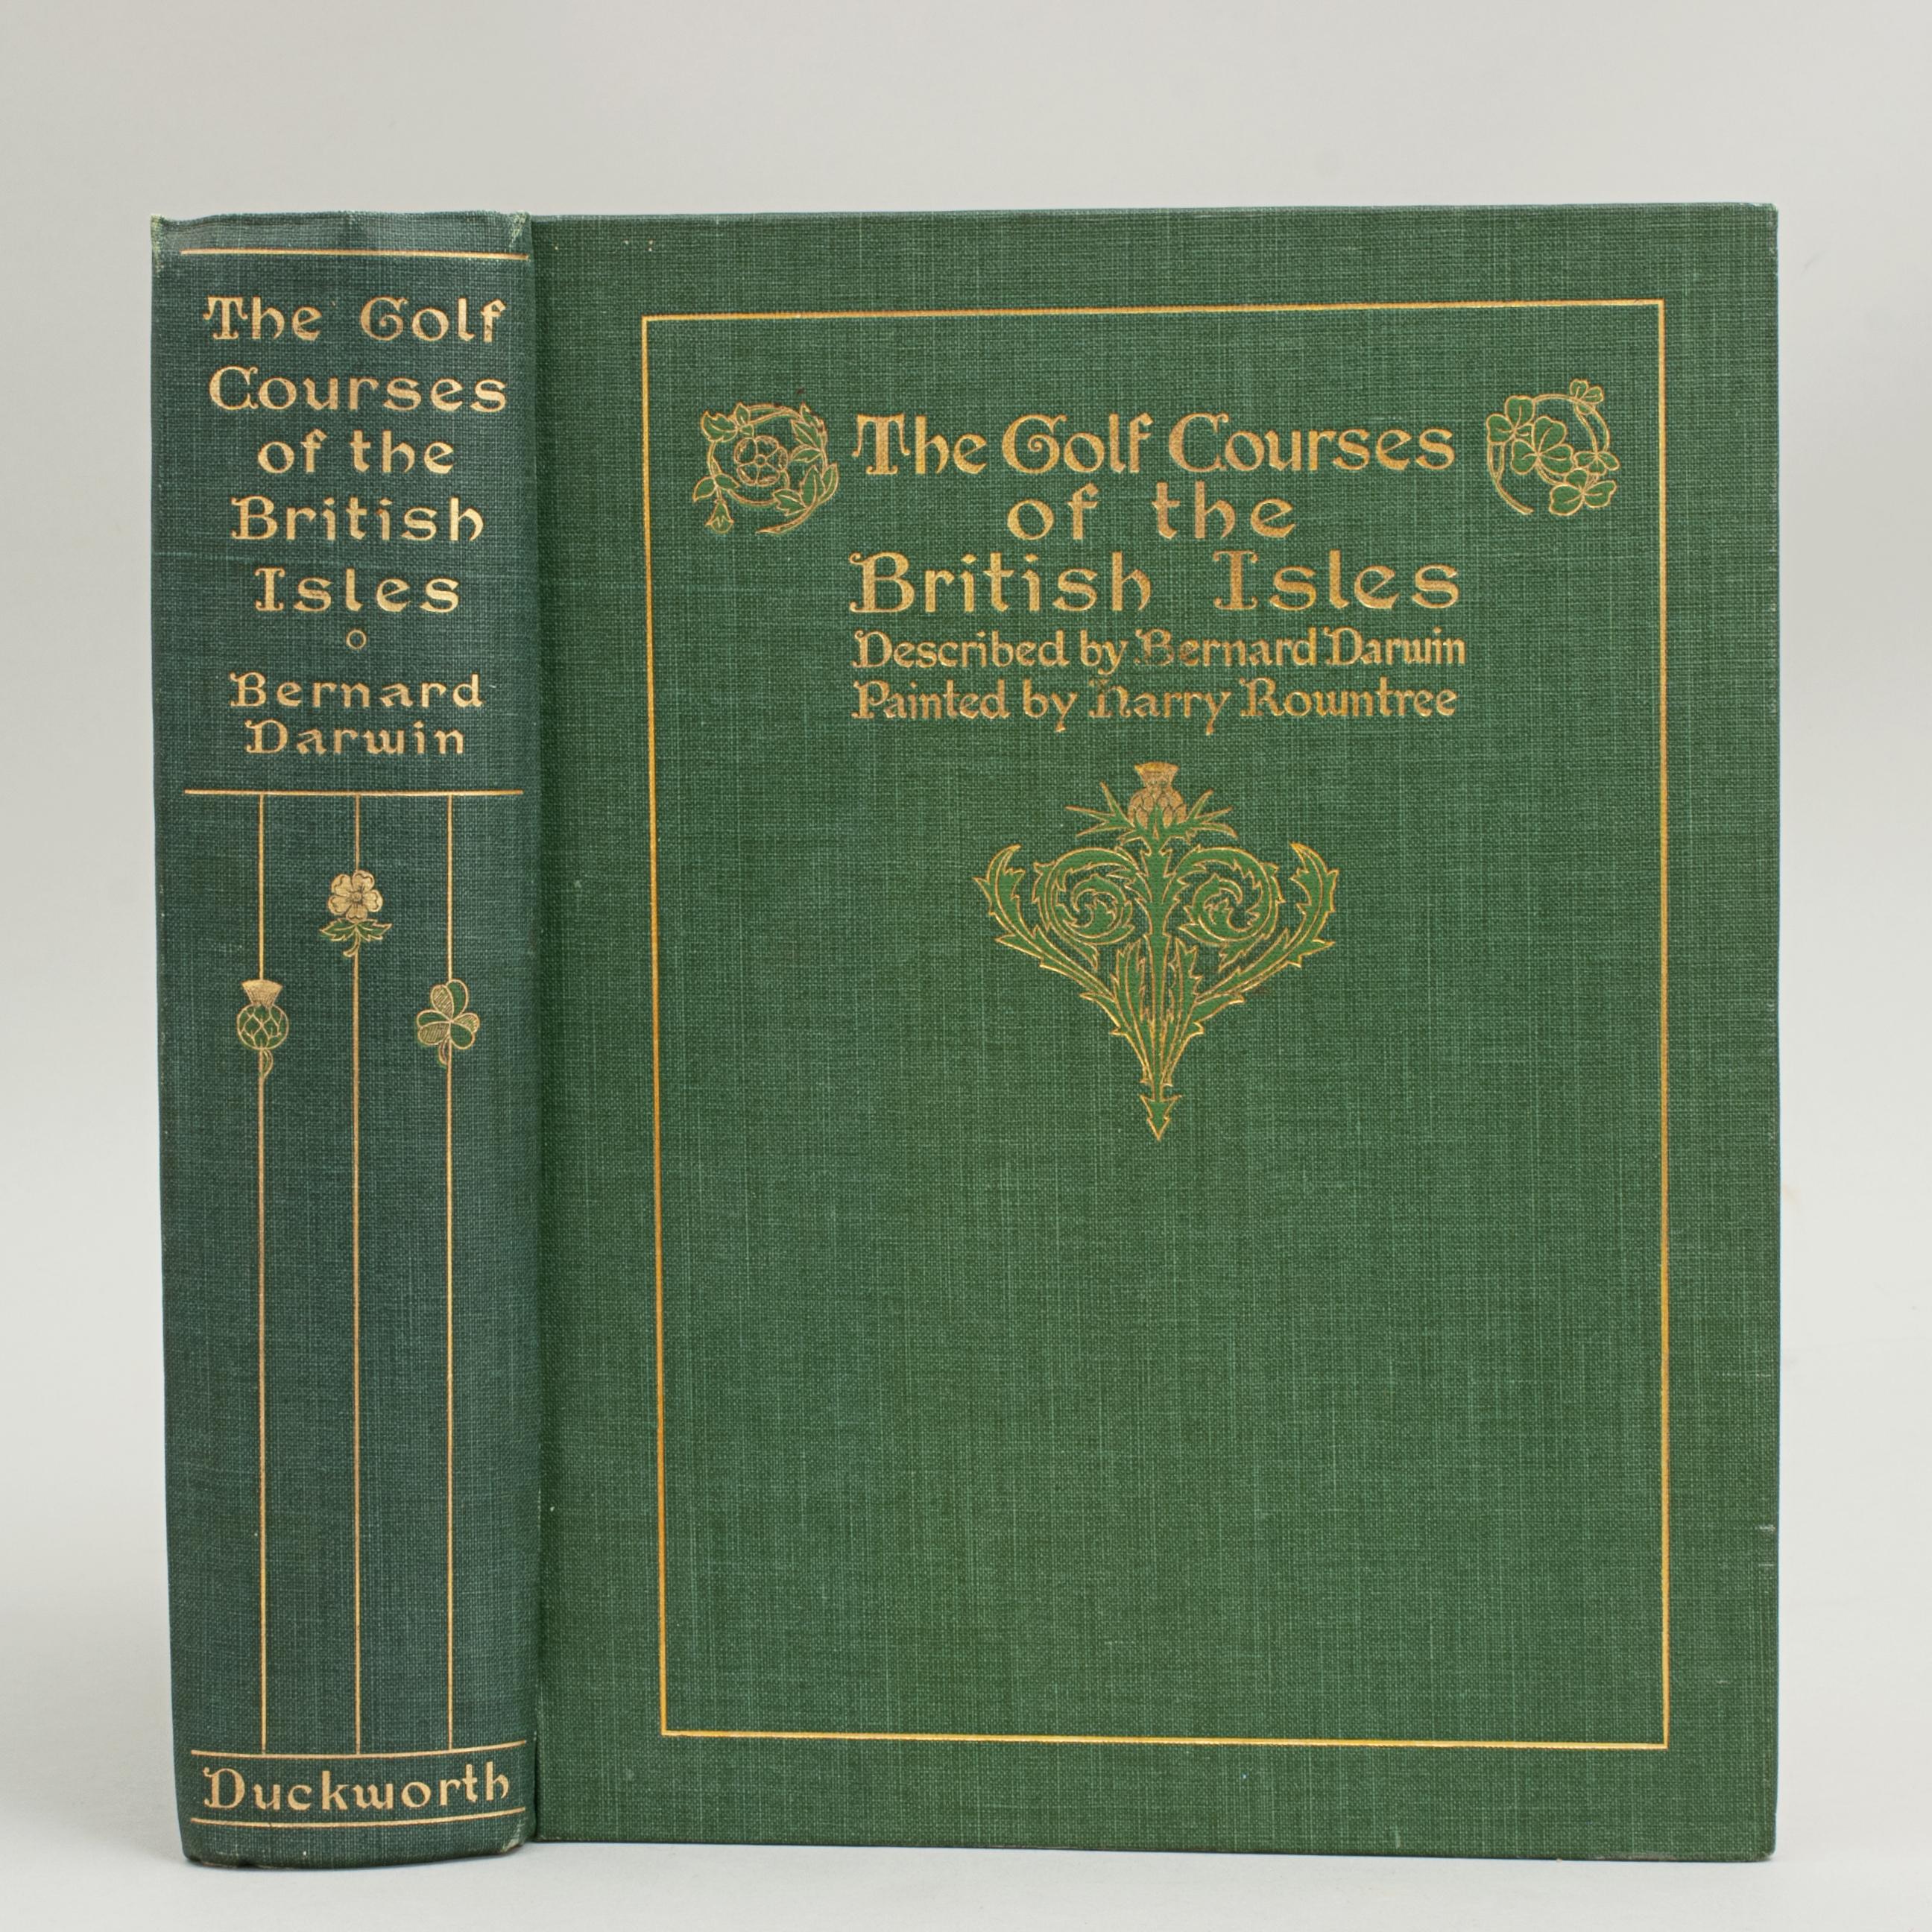 Antique Golf Book, The Golf Courses of the British Isles Described by Bernard Darwin.
A fantastic first edition golf book written by Bernard Darwin, one of the greatest golf writers ever to put pen to paper. 'THE GOLF COURSES OF THE BRITISH ISLES,